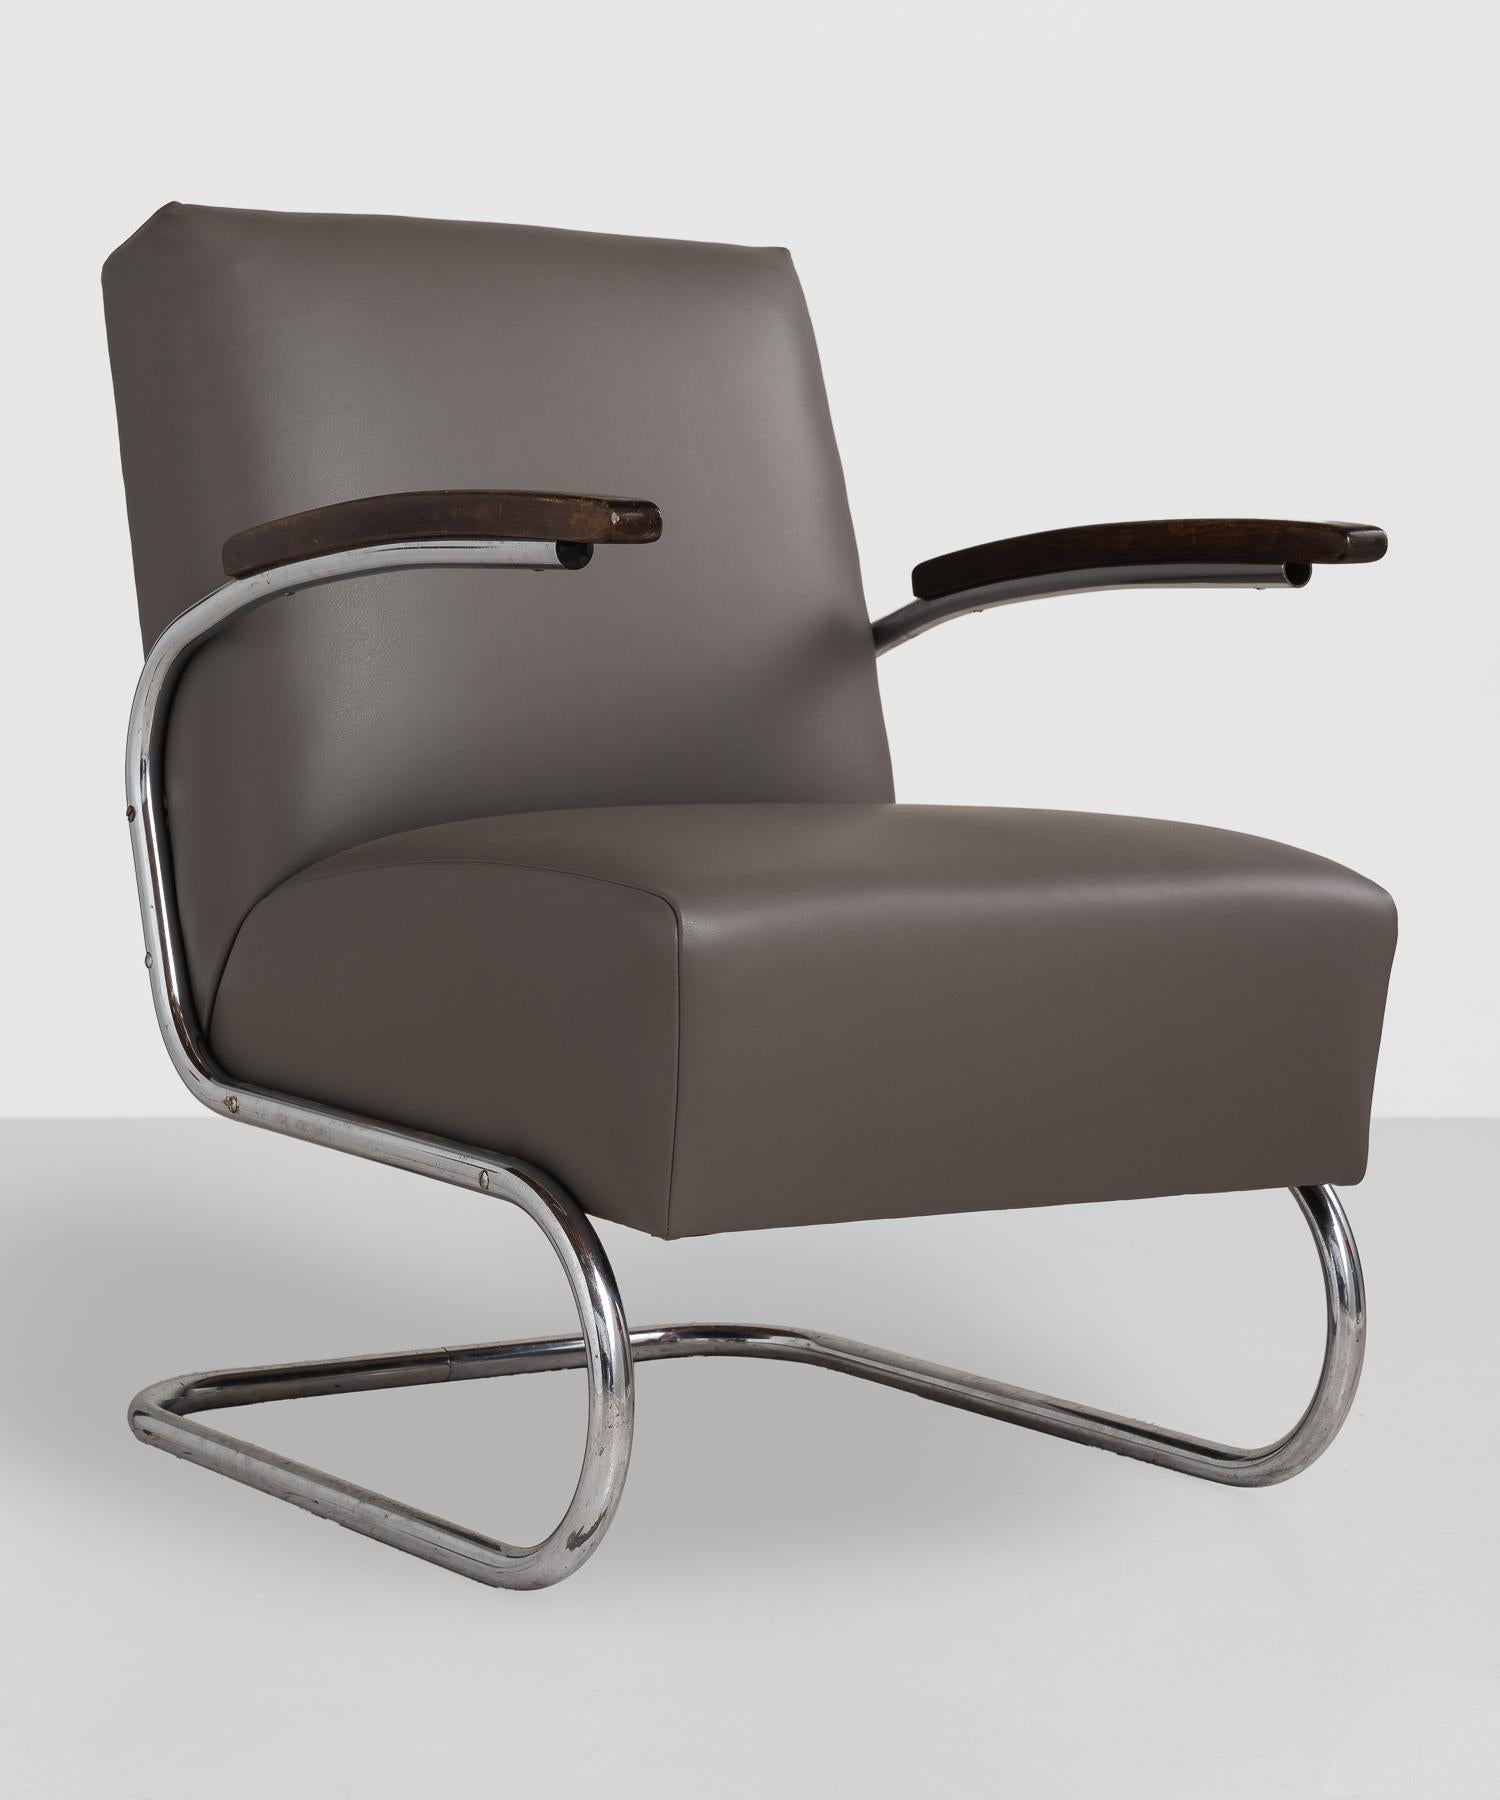 Thonet Modern Leather Armchair, Germany, circa 1930

Model SS41 Thonet armchair, newly reupholstered in Throne leather by Maharam. Cantilever frame in chromed steel with wooden armrests.

27.5